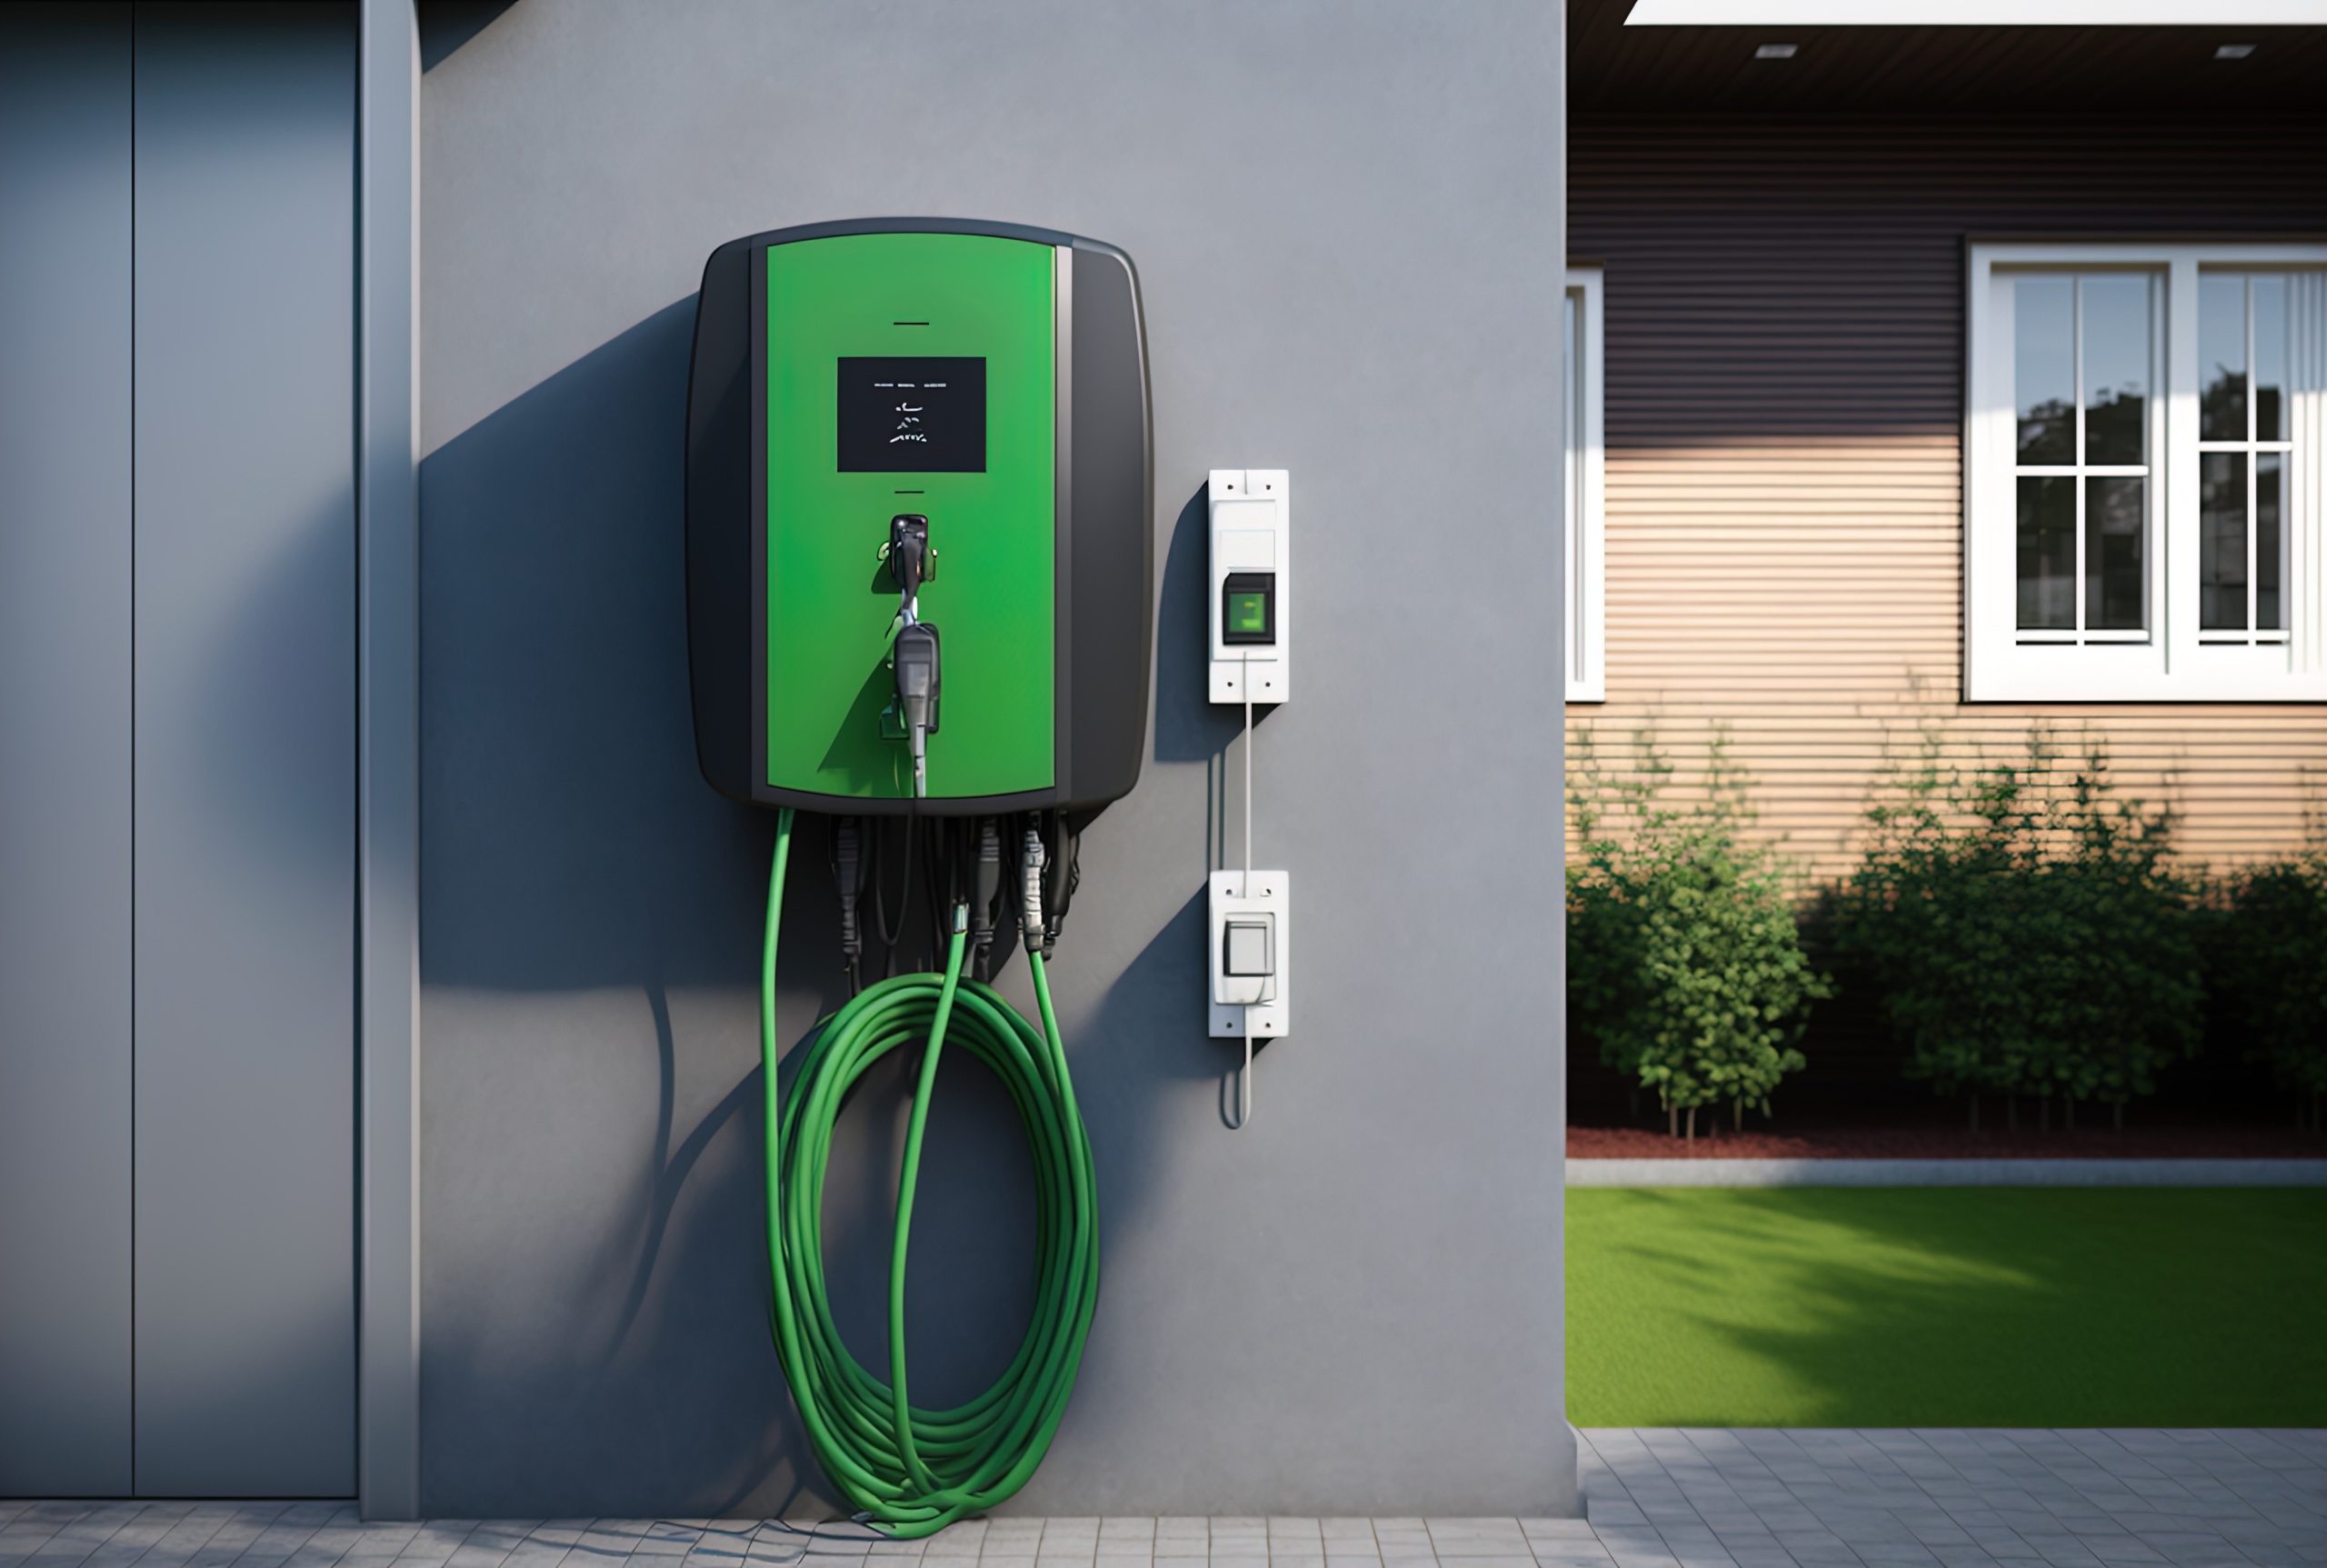 Powering Your Home With a Car: The Future of EV Charging?